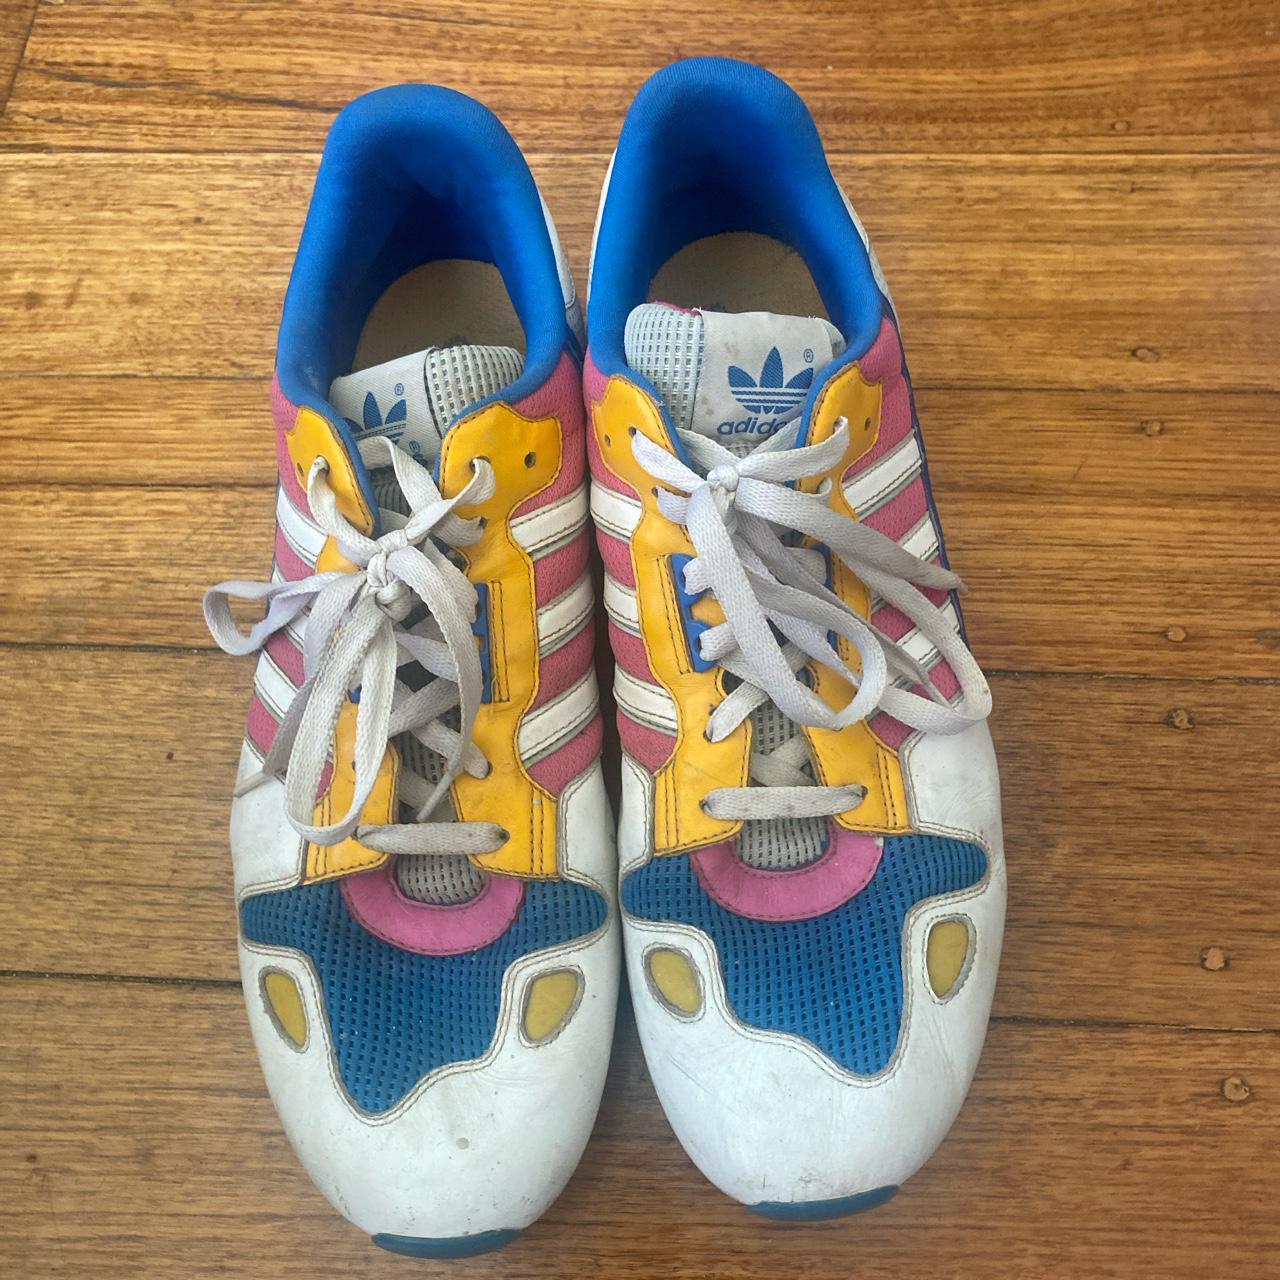 Awesome and hard to find 80s adidas shoes very... - Depop